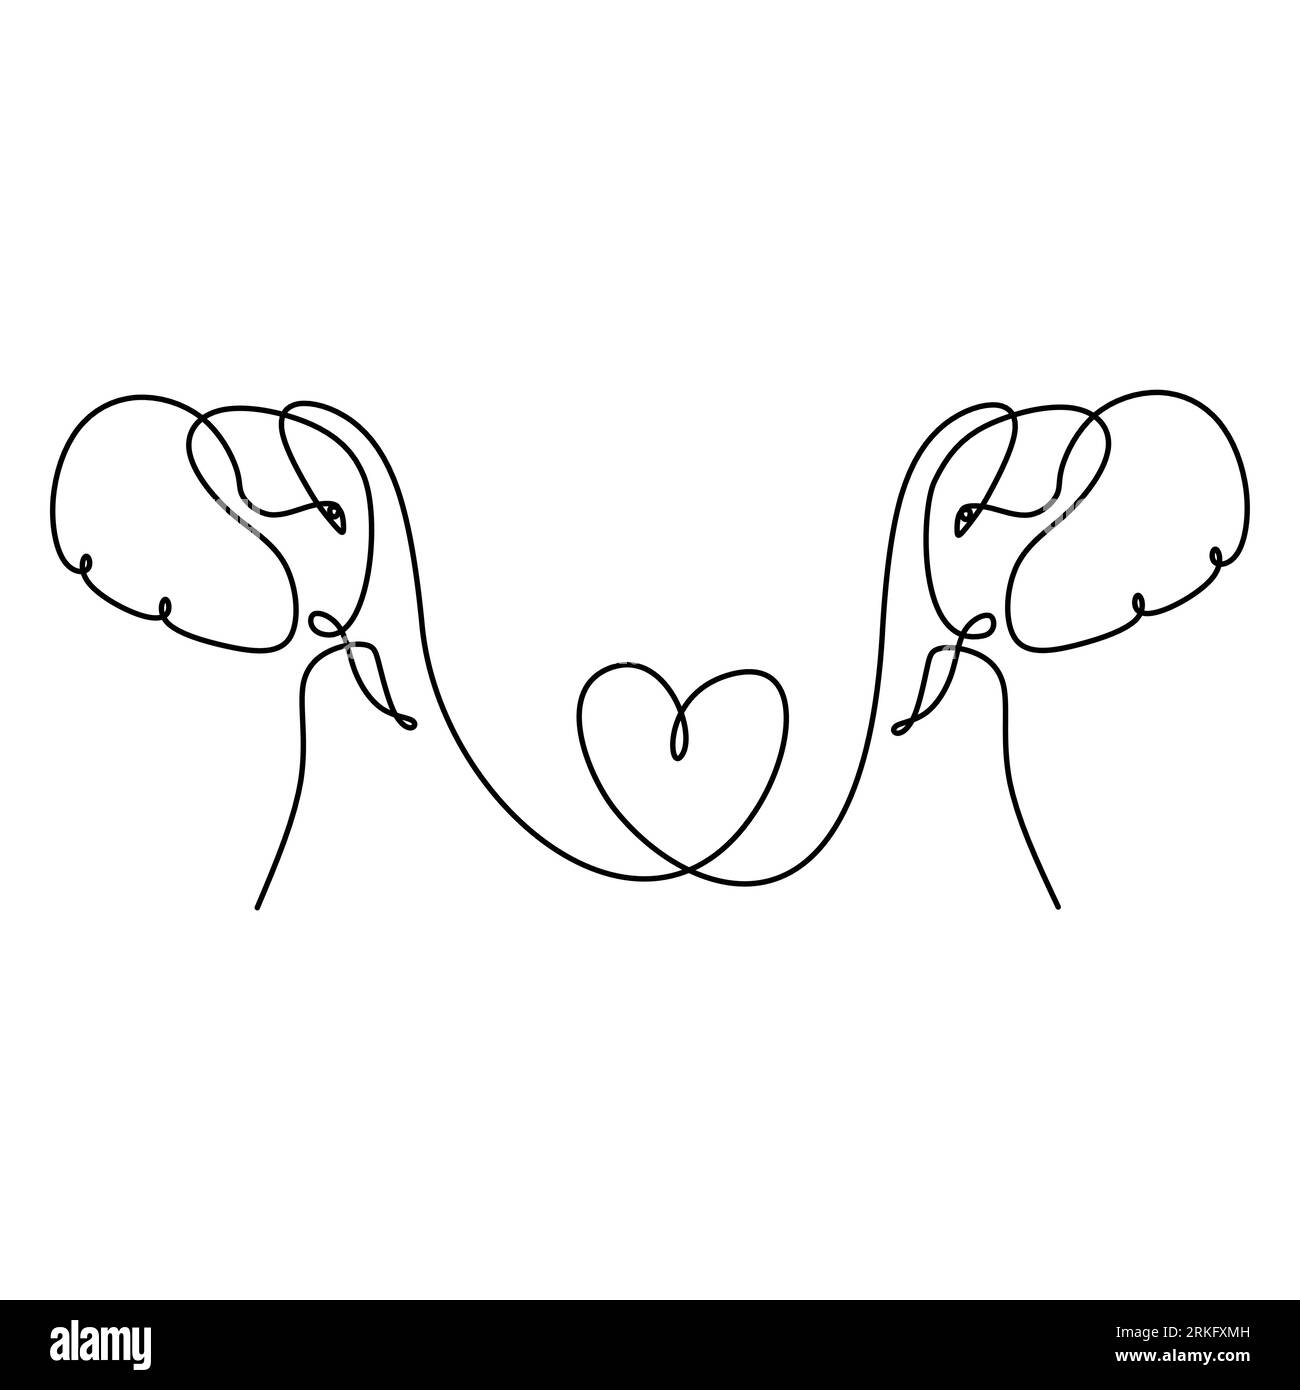 Continuous line drawing of two elephants silhouette with heart love symbols. Wedding, Valentine day, Hug day, family, friendship card design concept. Stock Vector